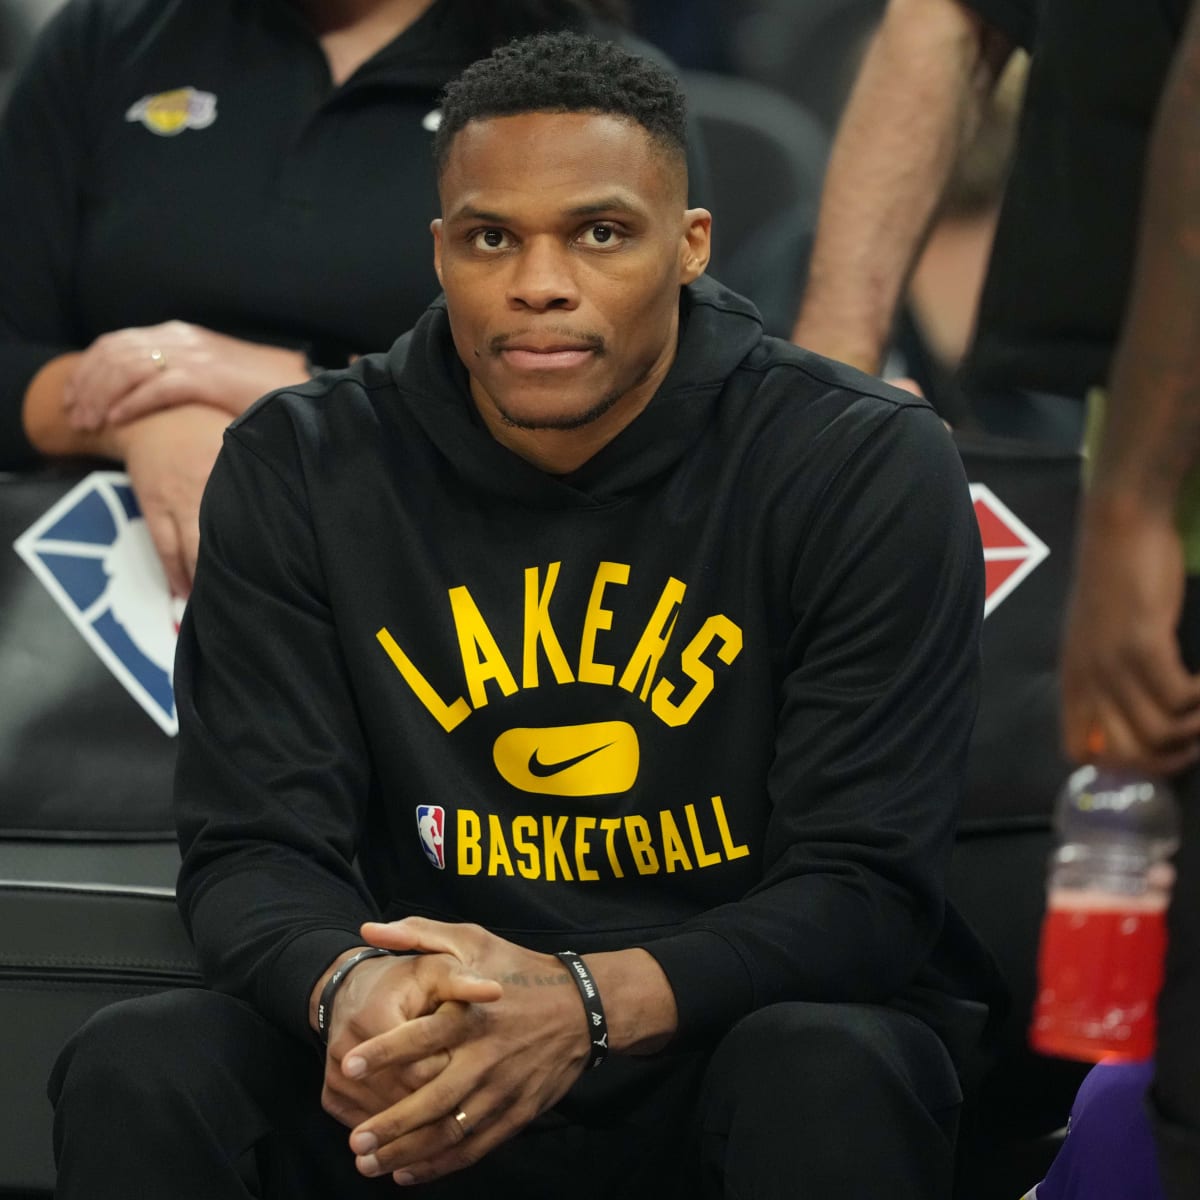 Westbrook eager to help Lakers